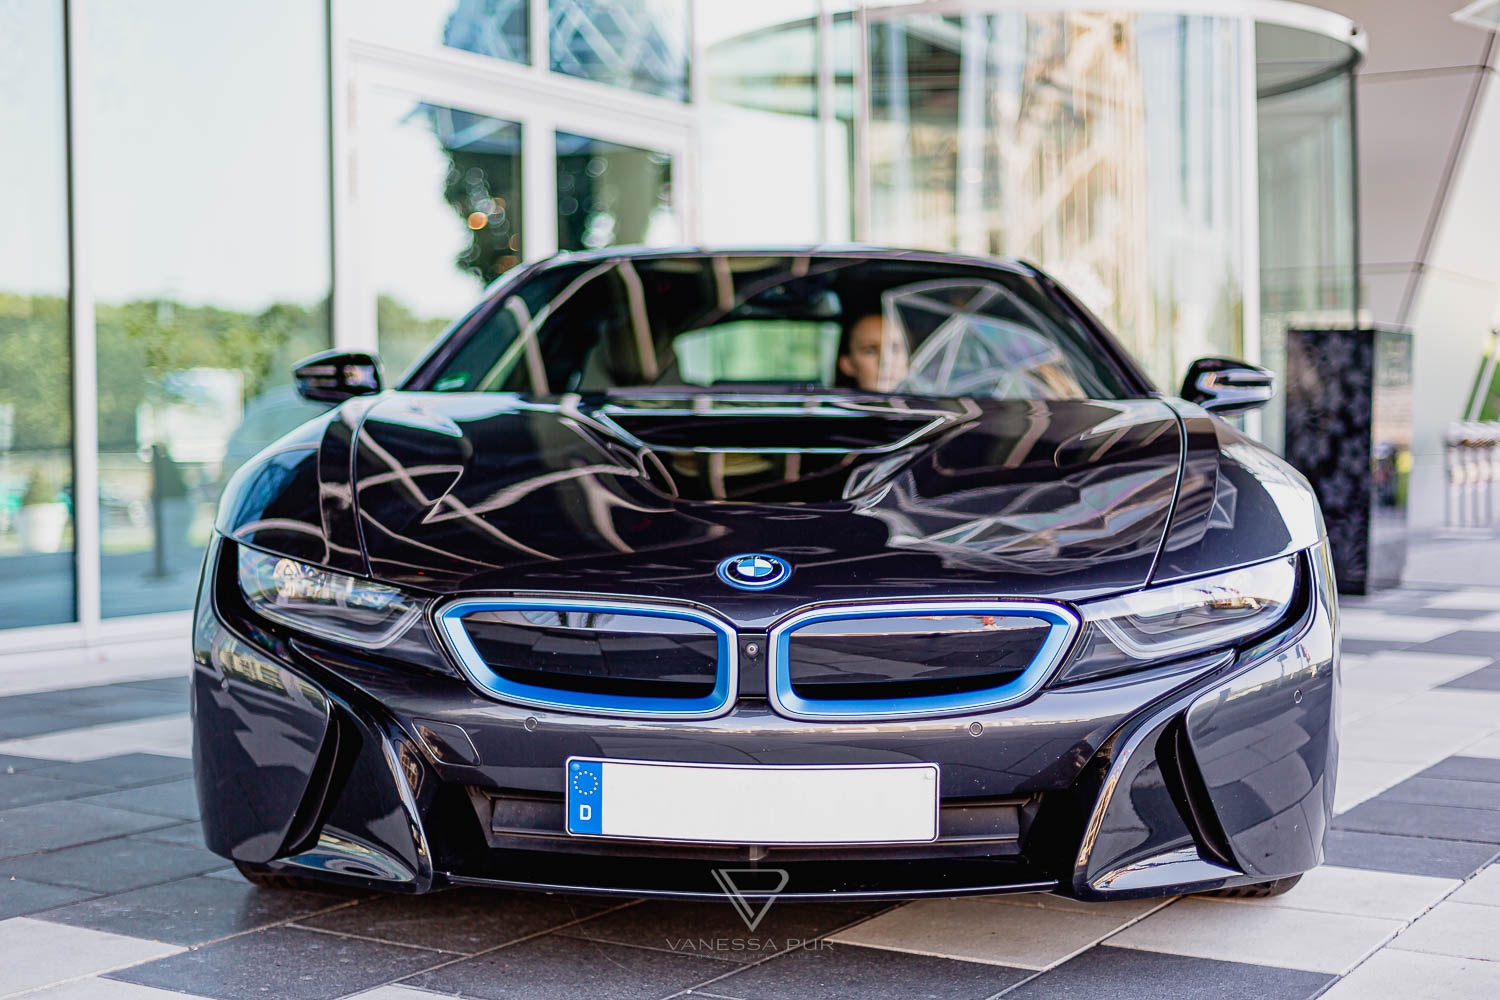 BMW i8 Plugin Hybrid - motorsport driving experience electric motor BMW i8 - luxury sports car - driving experience - first impression